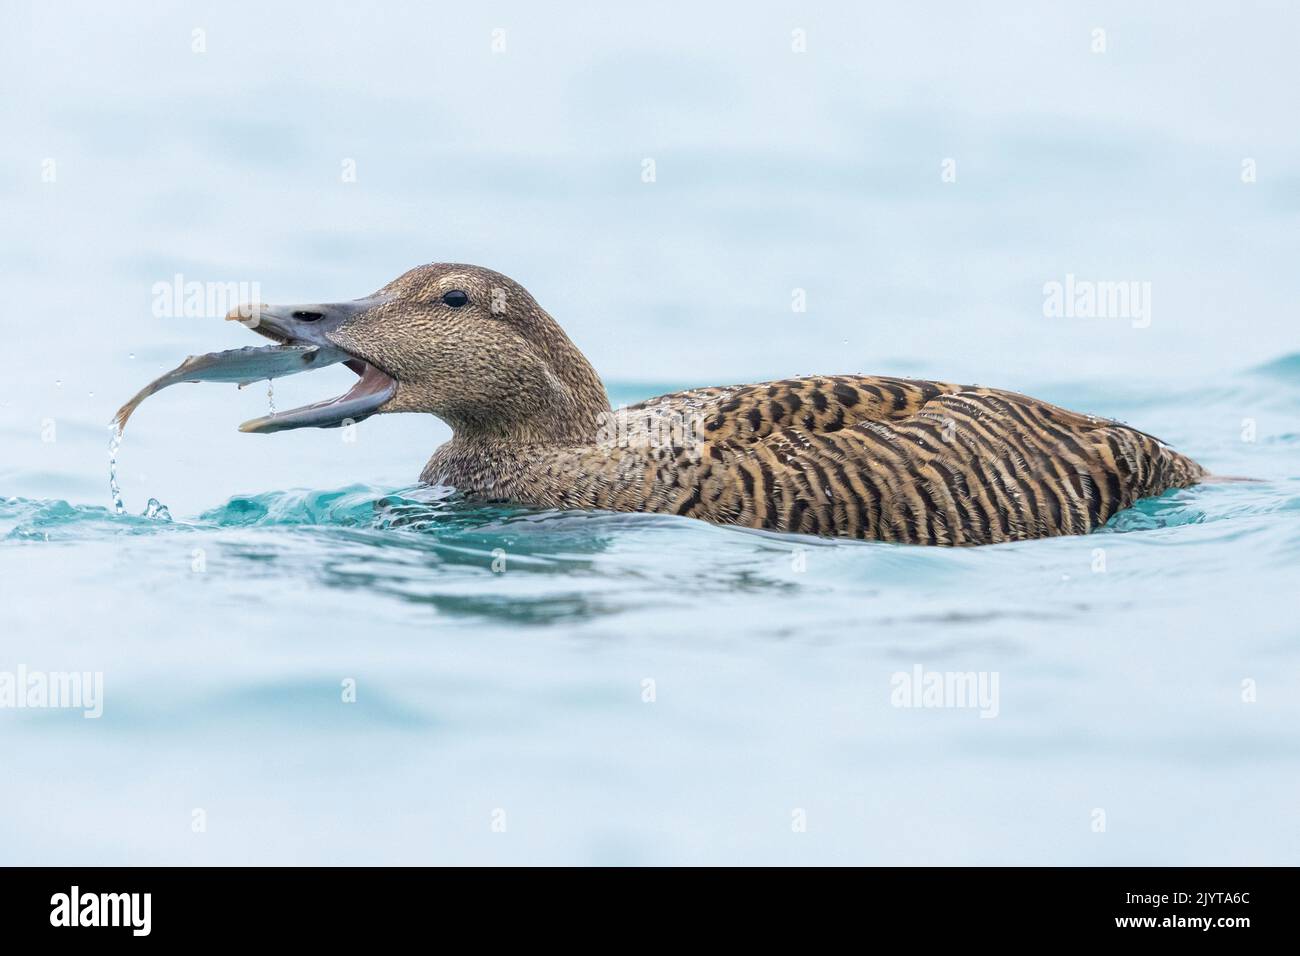 Common Eider (Somateria mollissima borealis), side view of an adult female feeding on a Sole, Southern Region, Iceland Stock Photo